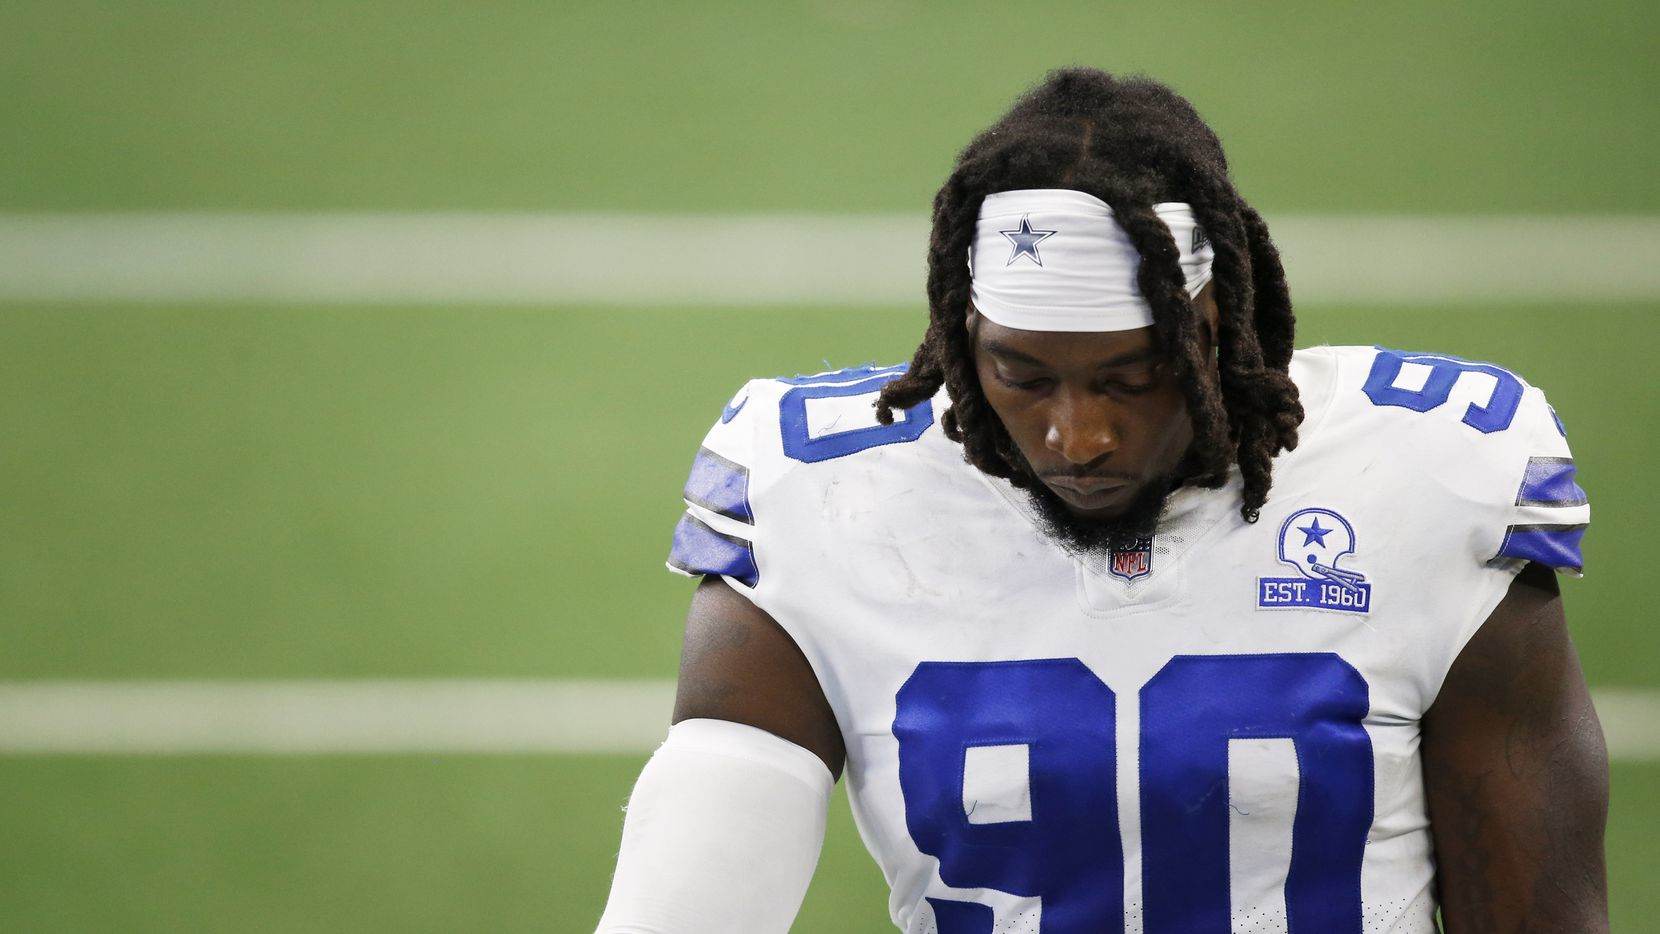 DeMarcus Lawrence: "I Don't Go Out There For The Glory Of Stats"